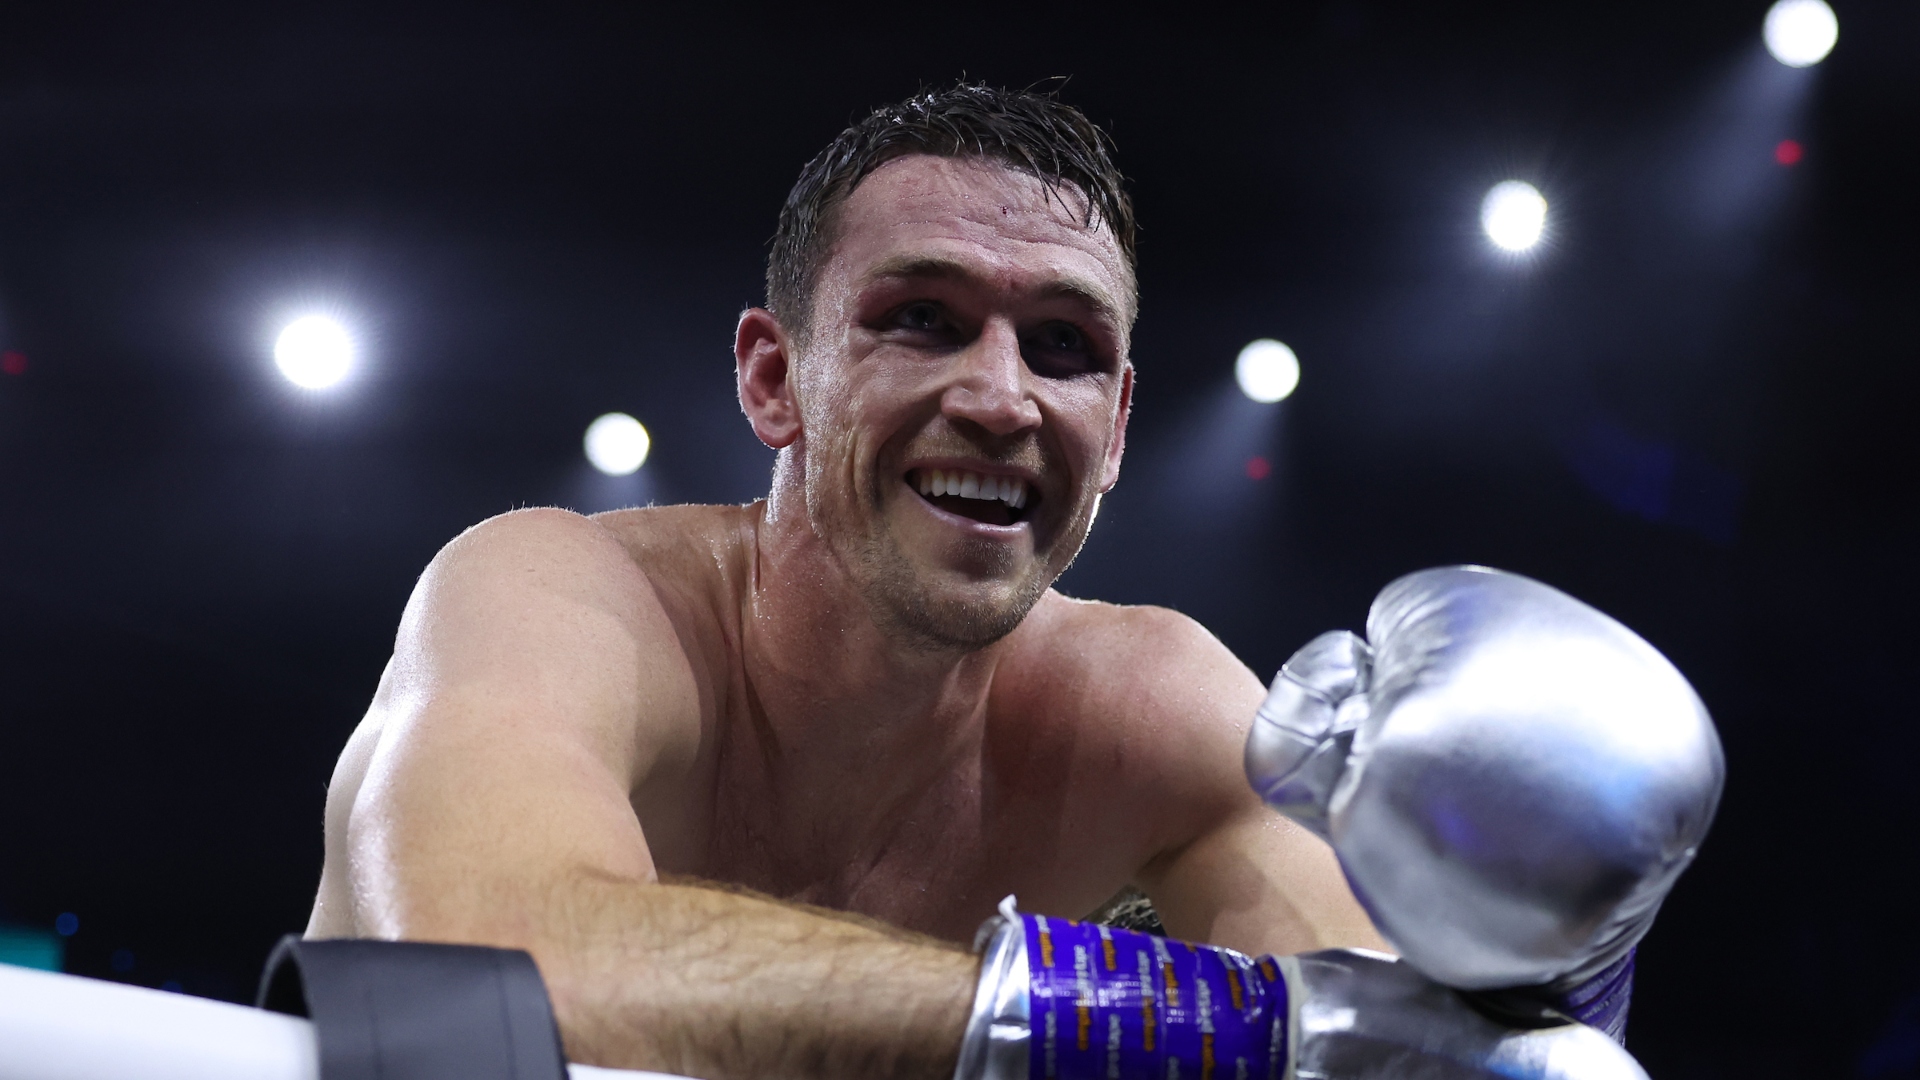 Callum Smith names the British fighter who is 'disrespectful' towards opponents